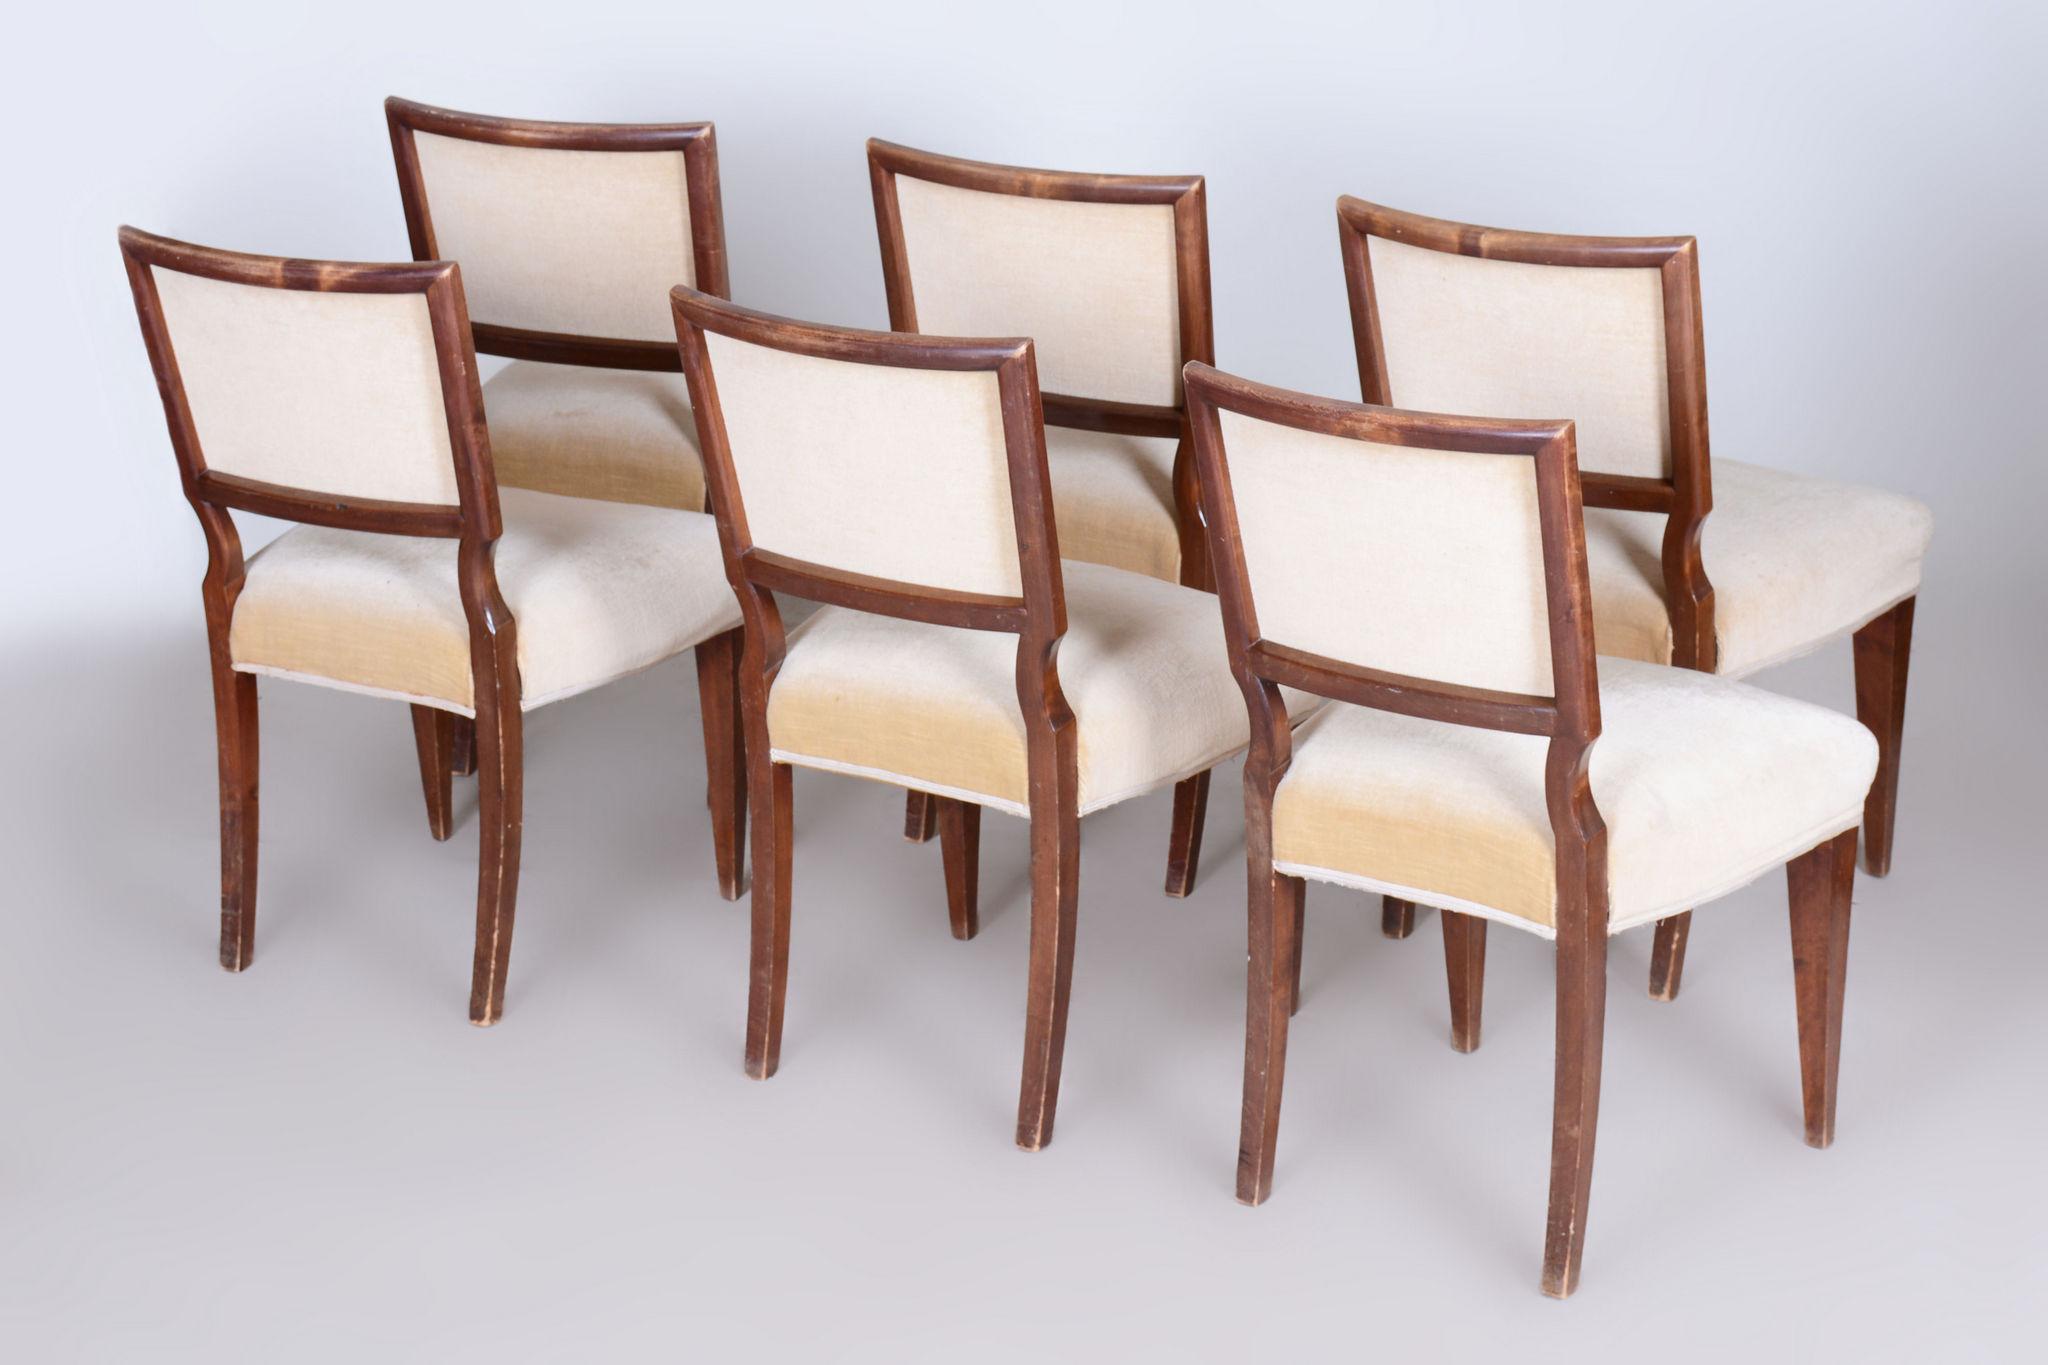 Set of Six Original Art Deco Chairs, Solid Walnut, France, 1920s In Good Condition For Sale In Horomerice, CZ